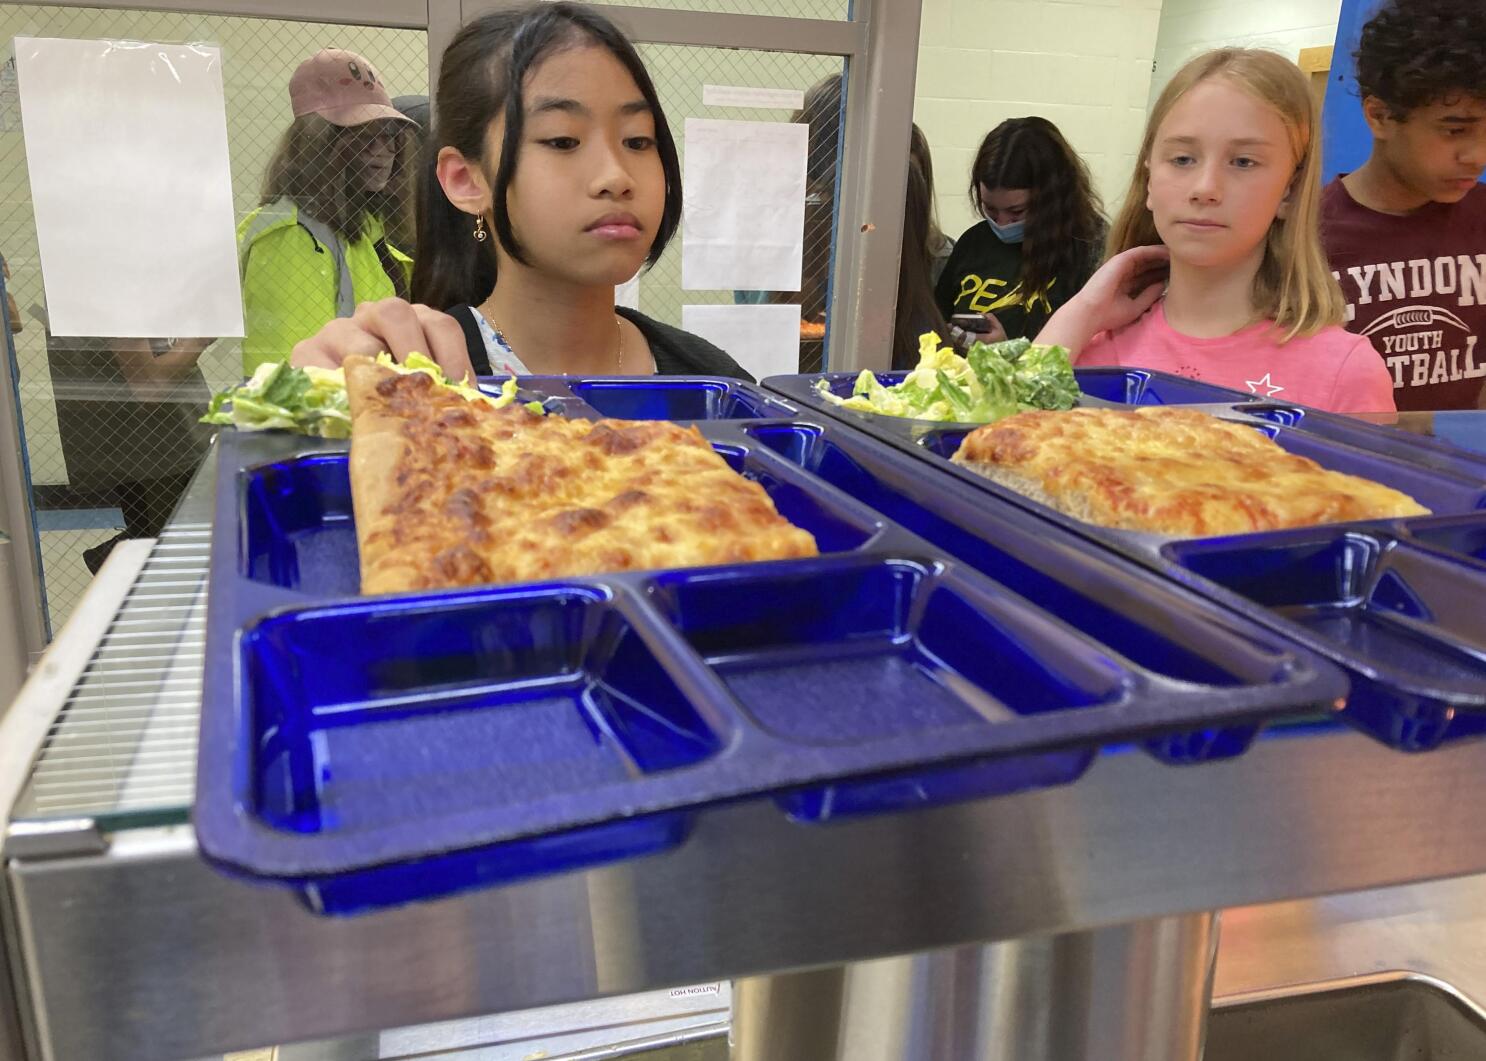 Food Inflation Is Still High. the School Lunch Is the Perfect Example